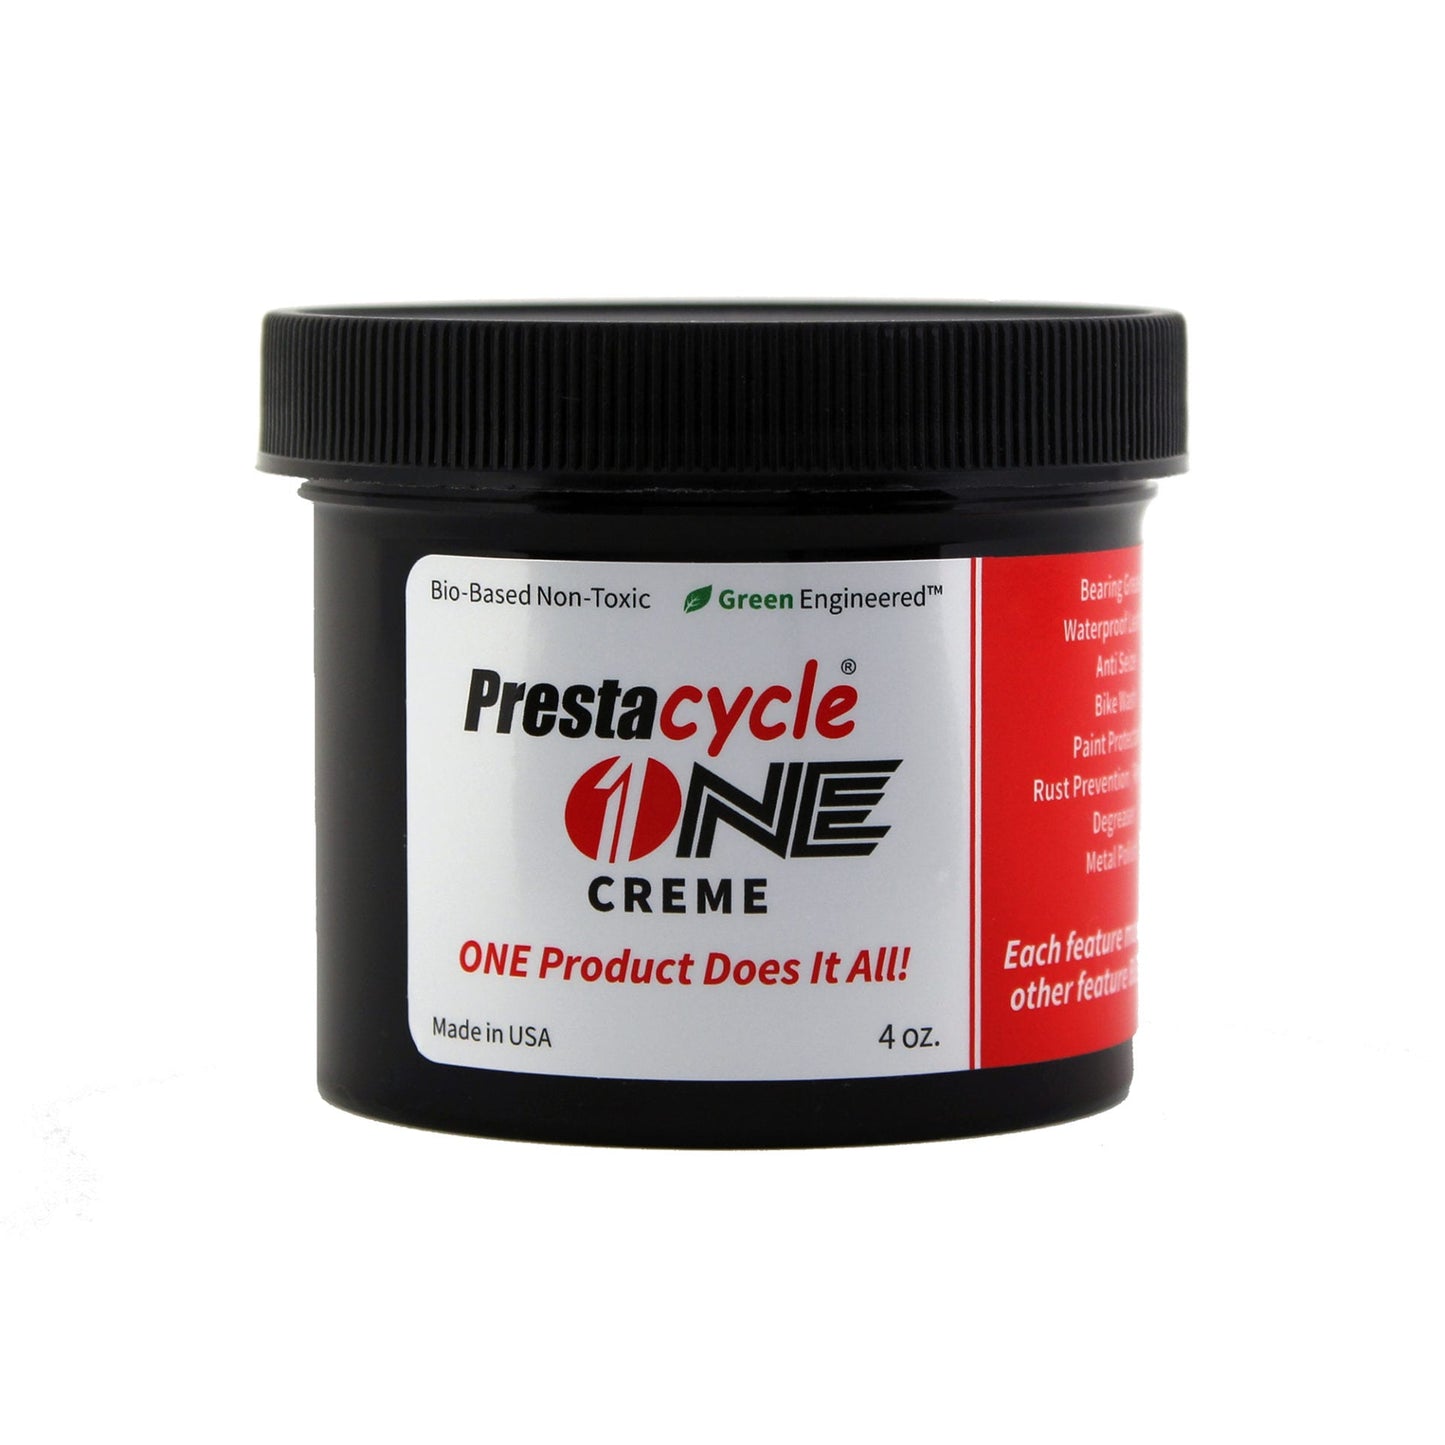 Prestacycle One